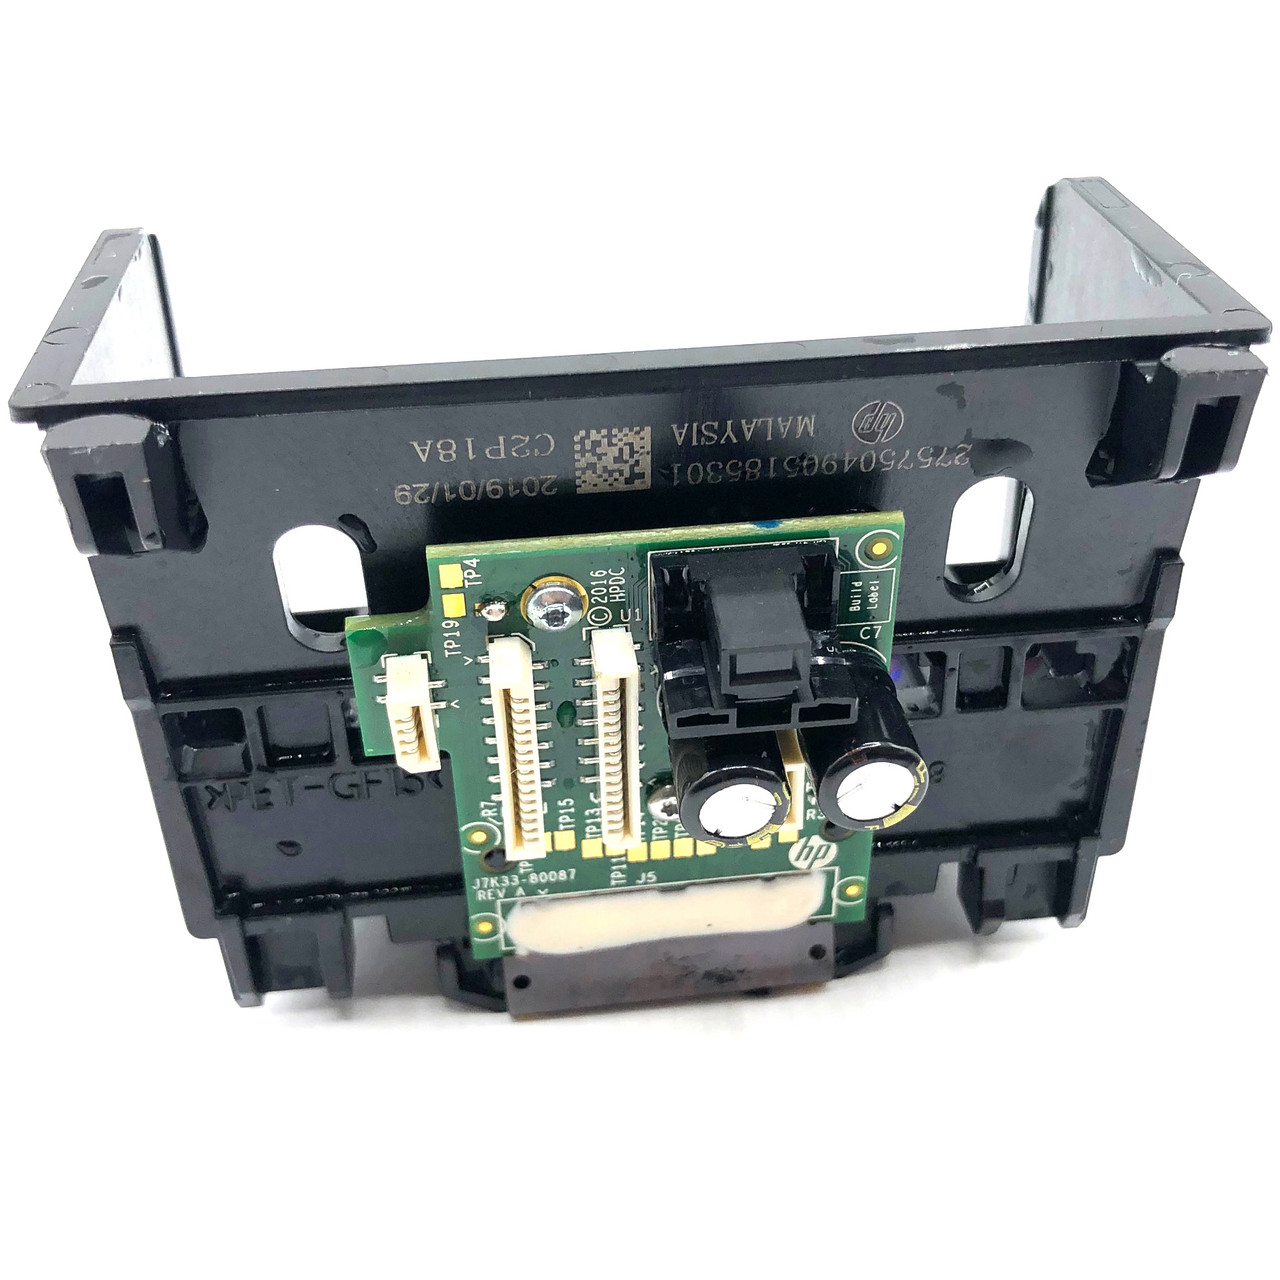 moden Mary ydre NO RETURN Refurbished HP 910 / 916 Printhead for HP OfficeJet Pro 8022 8025  8028 8035 - BCH Technologies